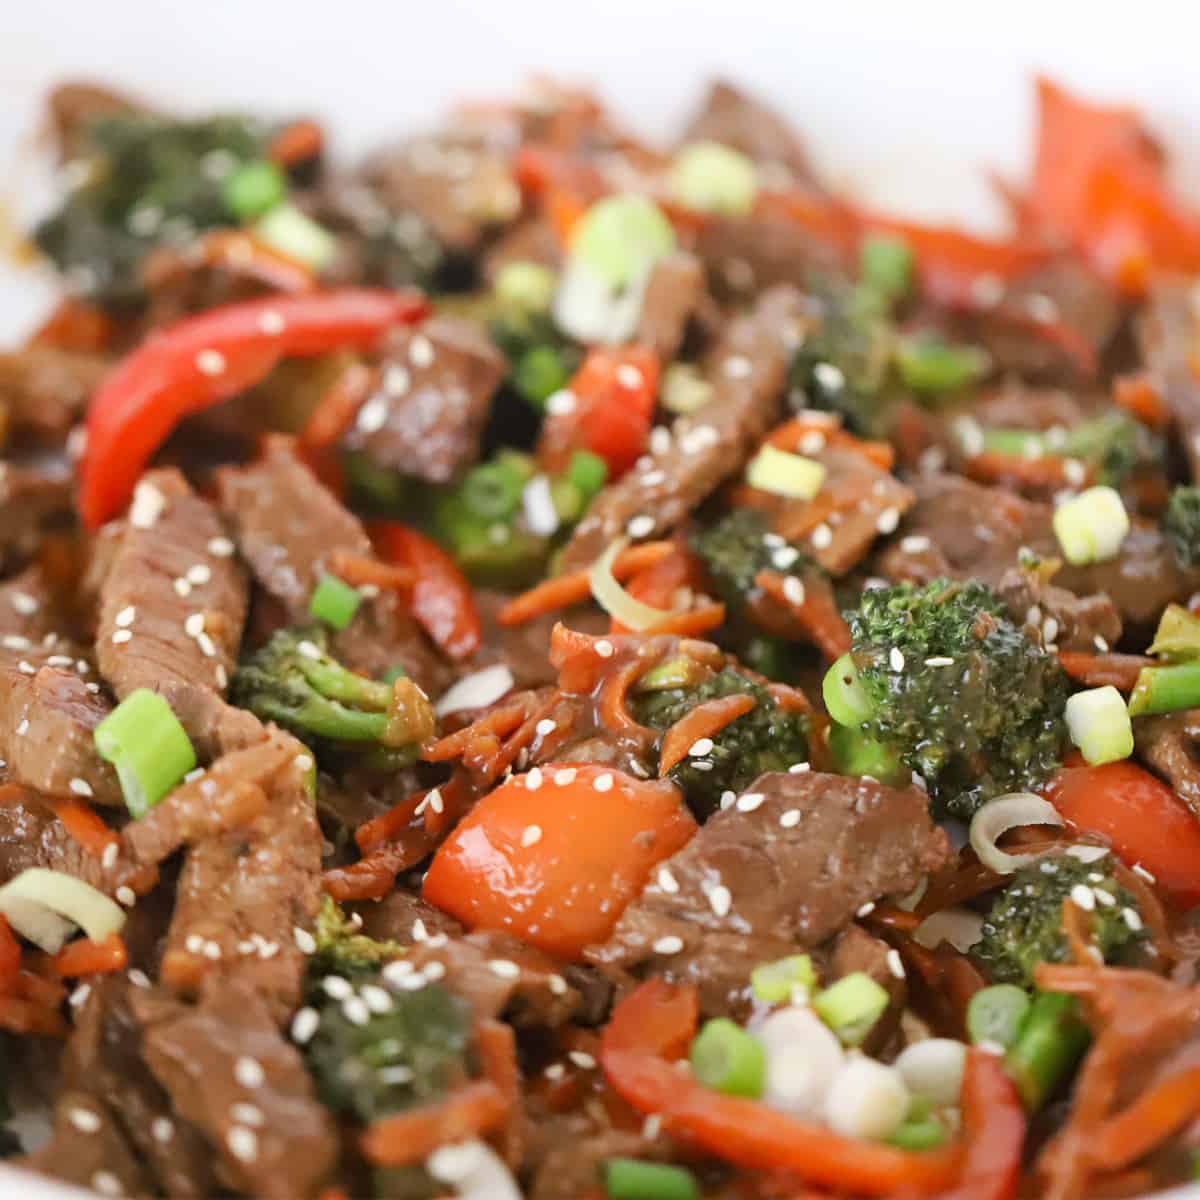 Korean beef Stir fry recipe garnished with sesame seeds and green onions.